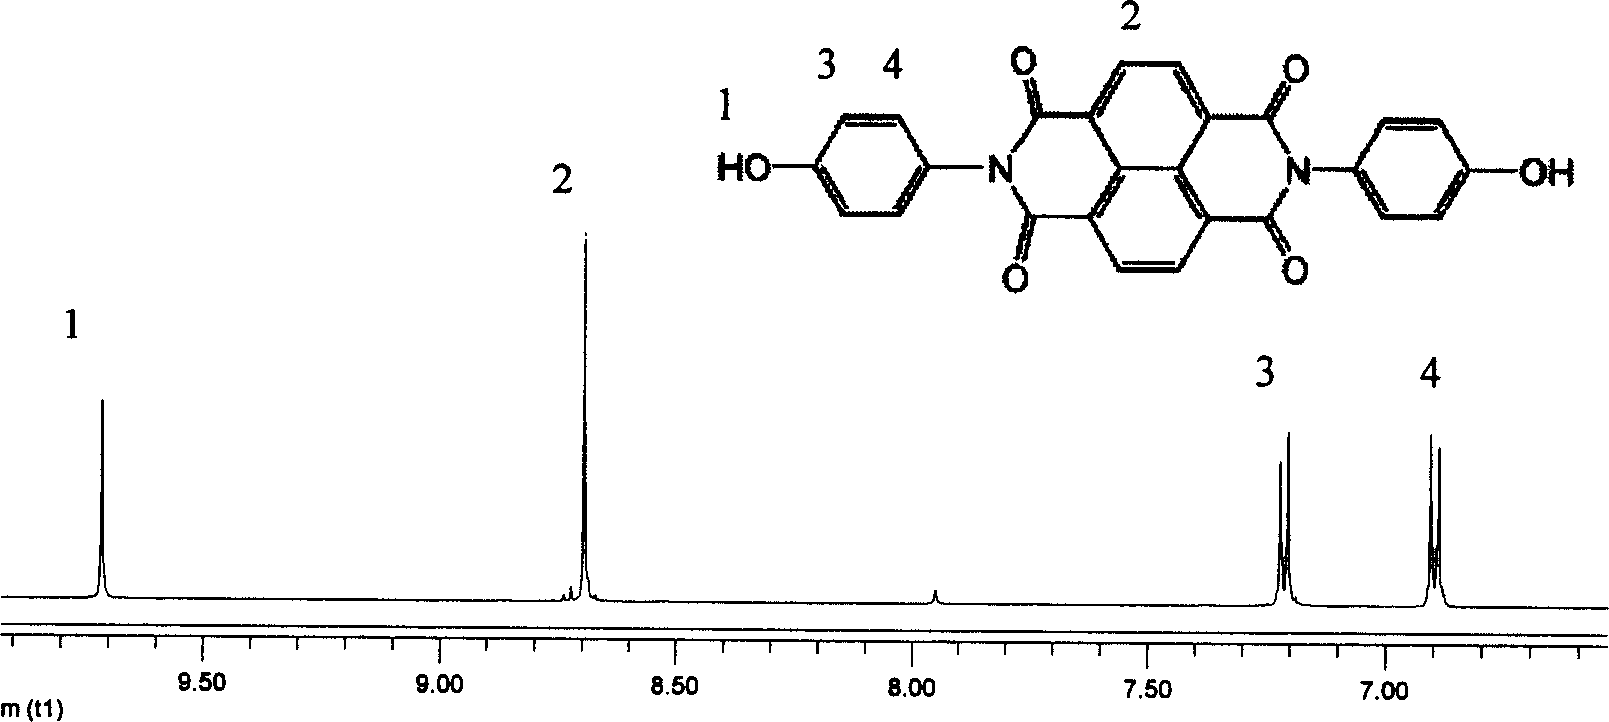 Bisphenols monomer with imide structure and its synthesis